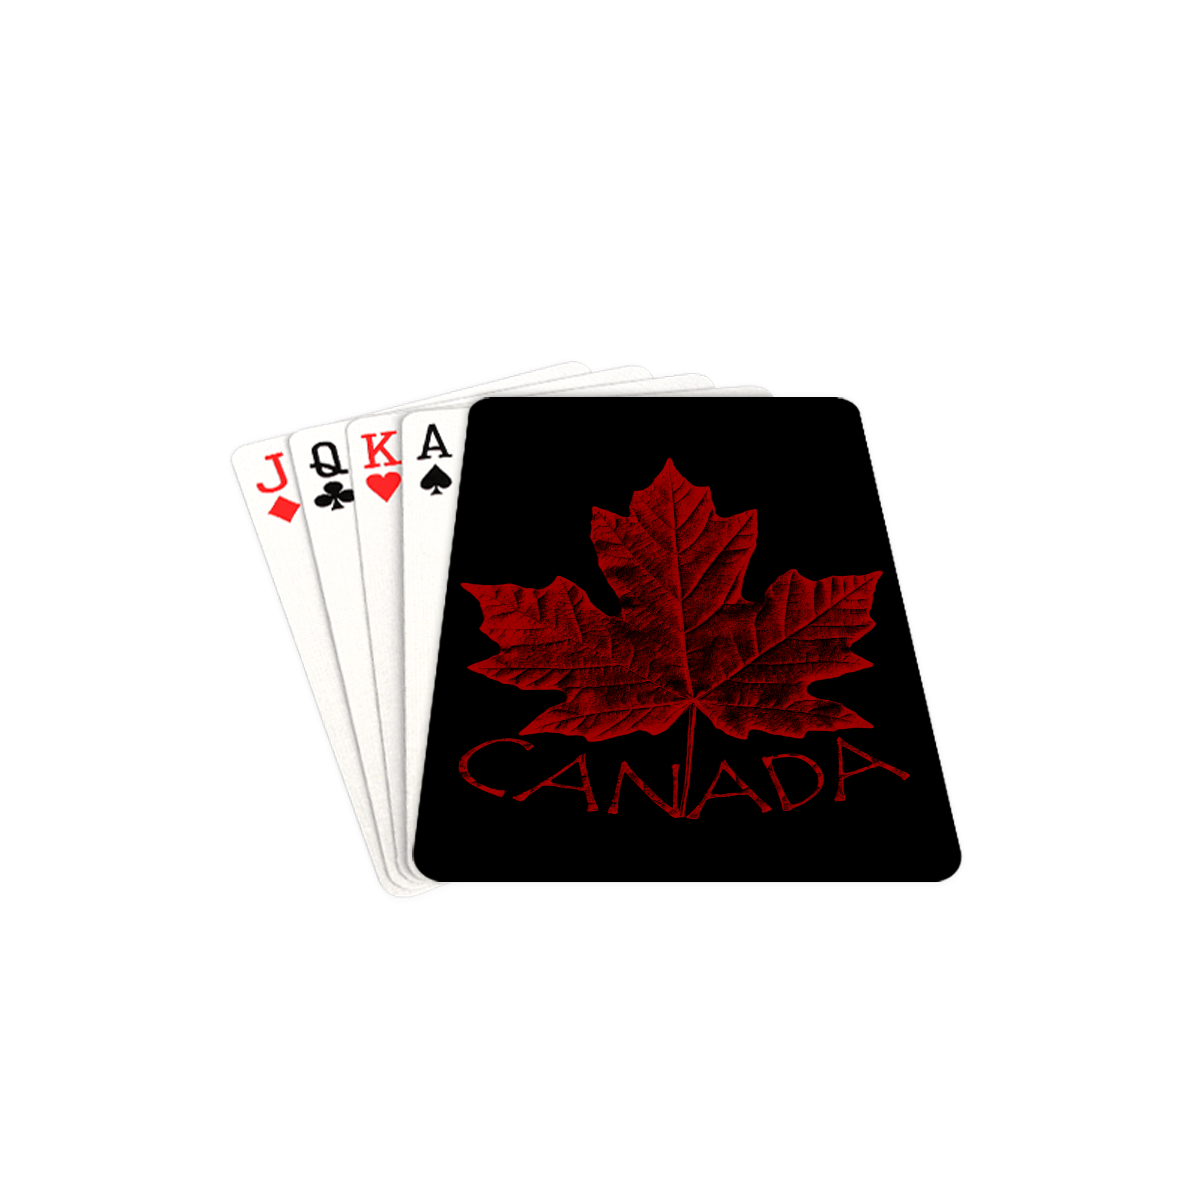 Canada Vintage Playing Cards 2.5"x3.5"